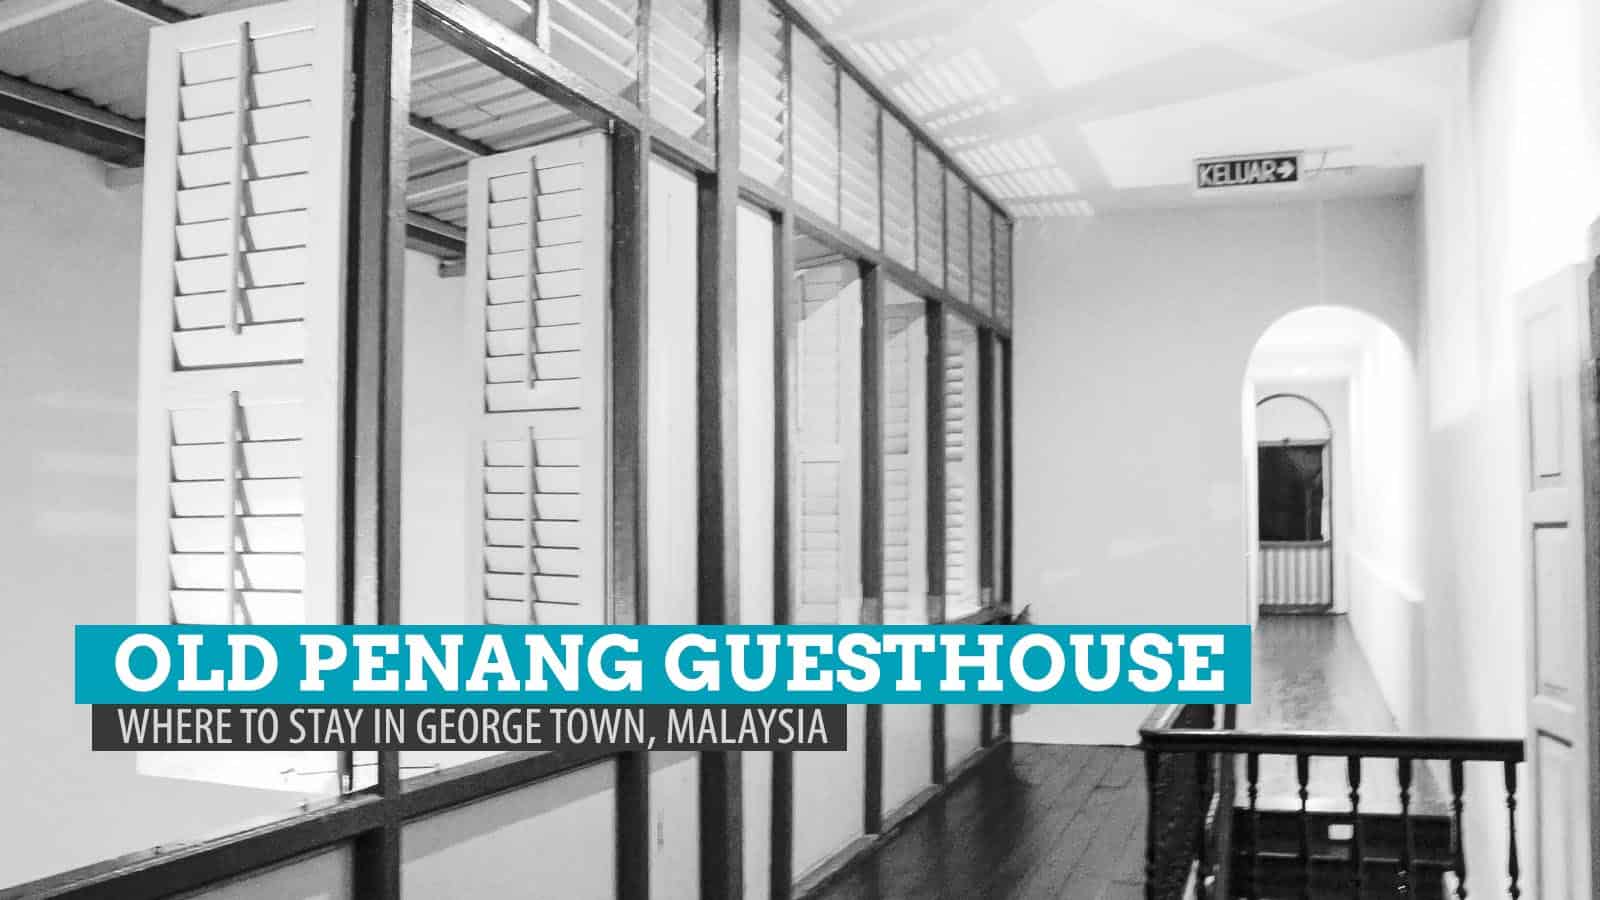 Old Penang Guesthouse: Where to Stay in Georgetown, Malaysia